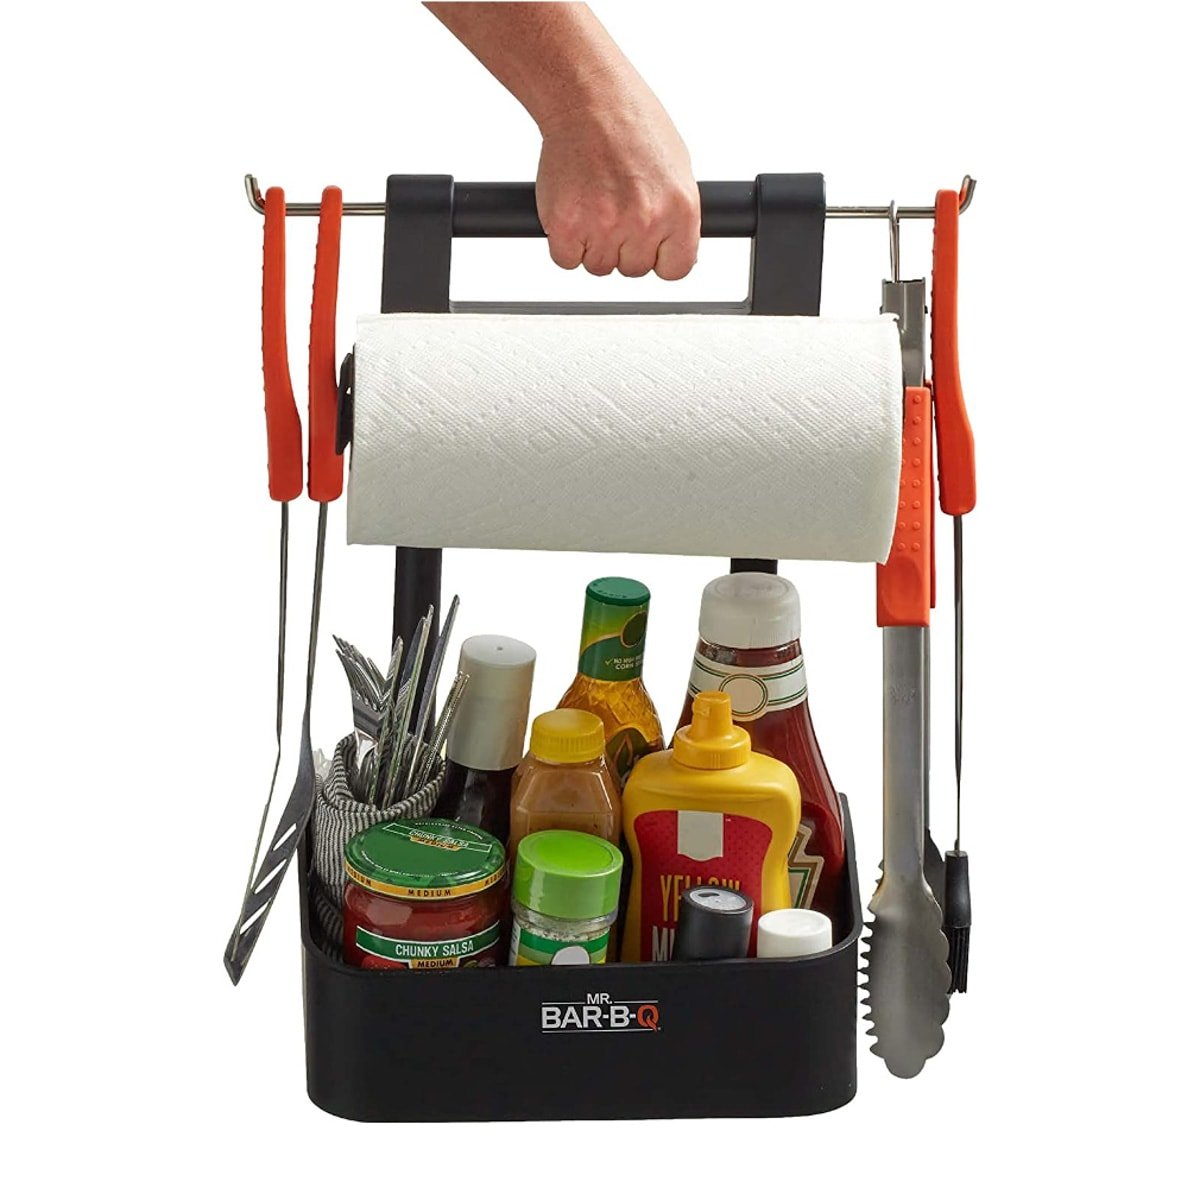 A black caddy used to hold barbecuing supplies, seasonings and condiments.